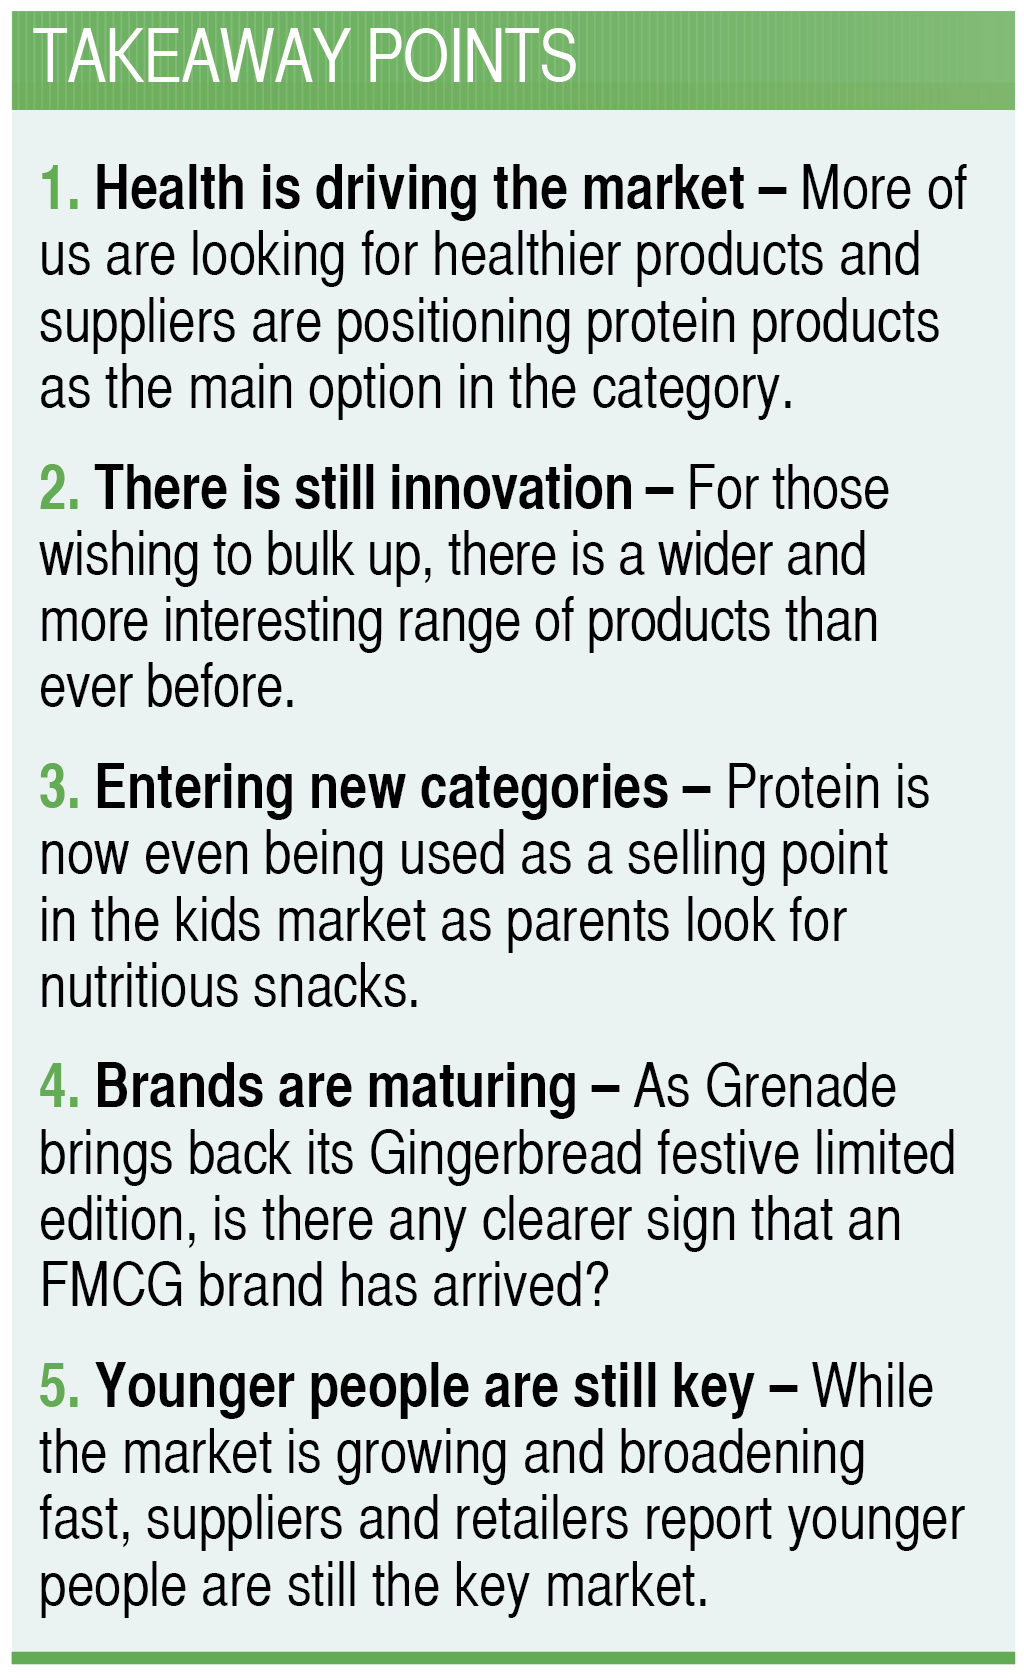 Takeaway points on protein products